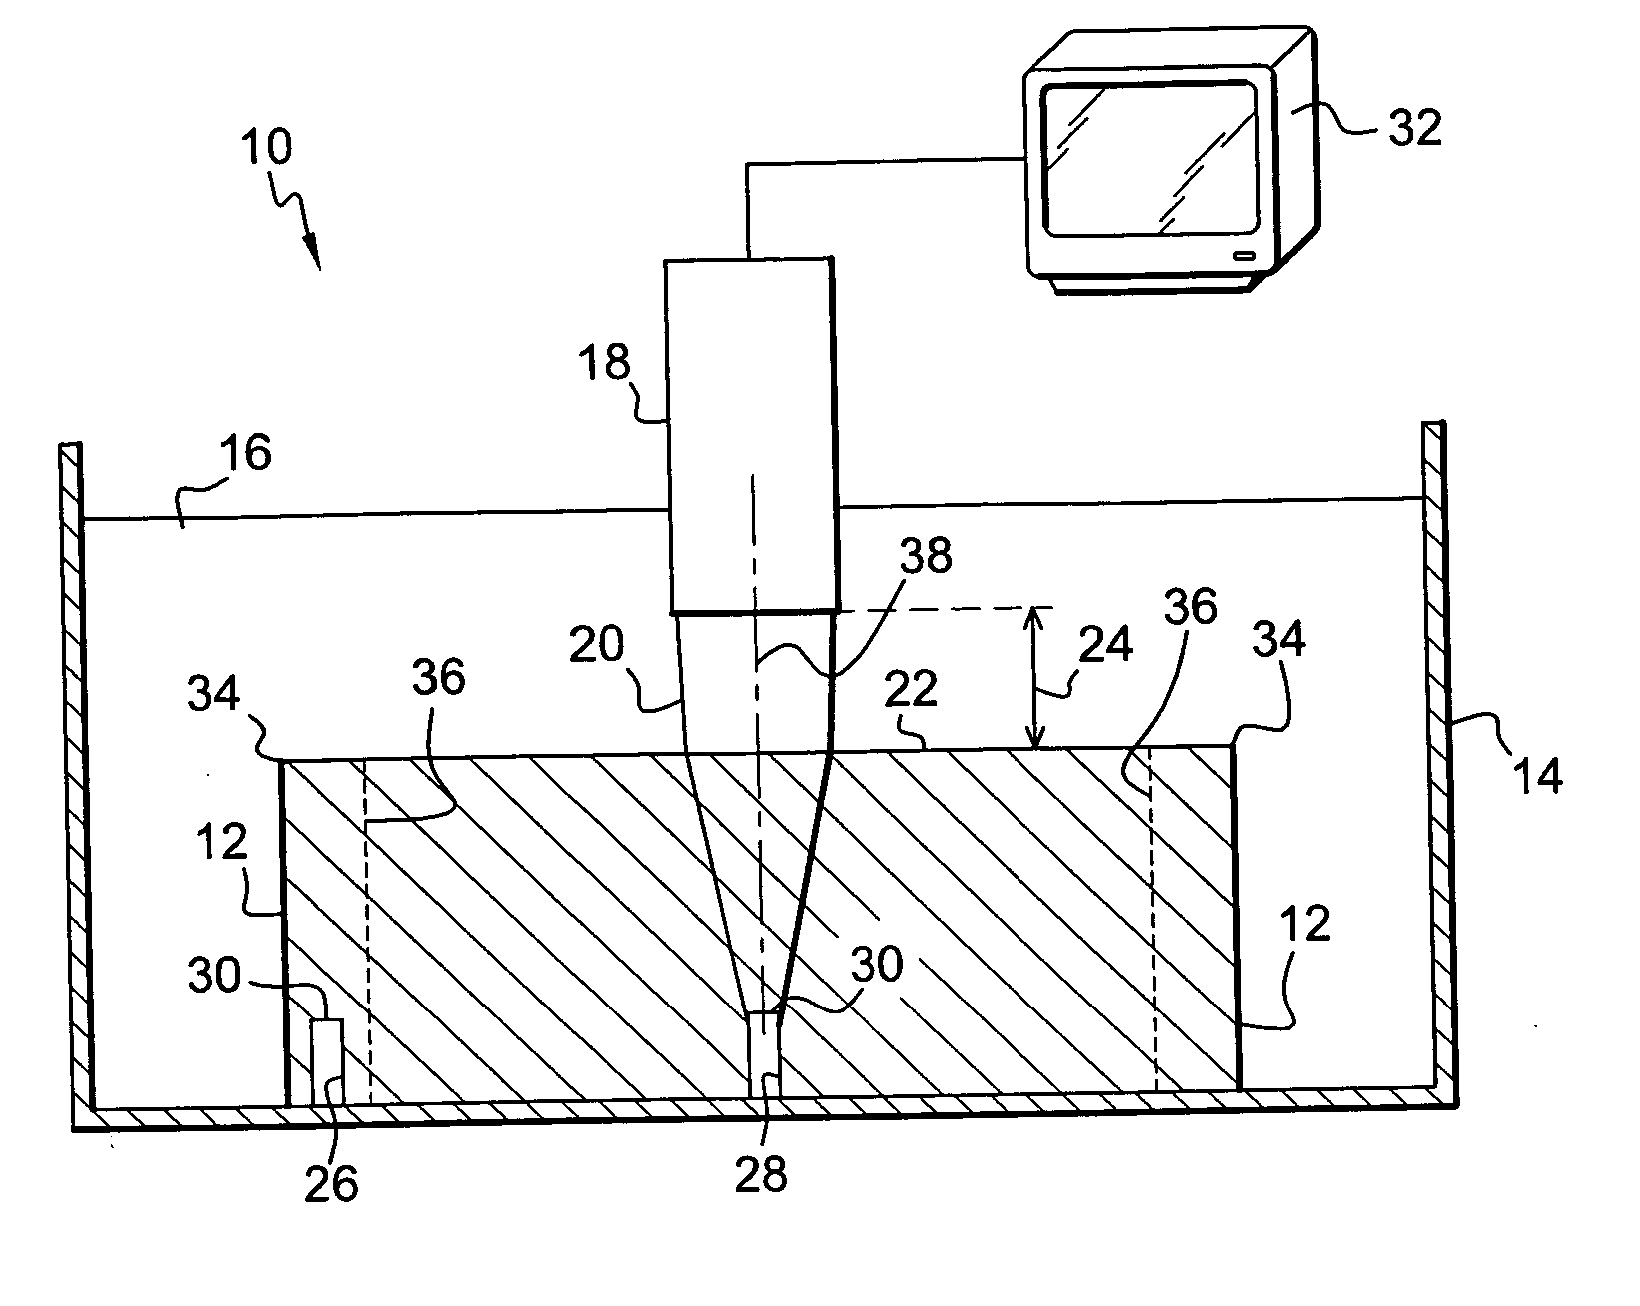 Method of using ultrasound to inspect a part in immersion